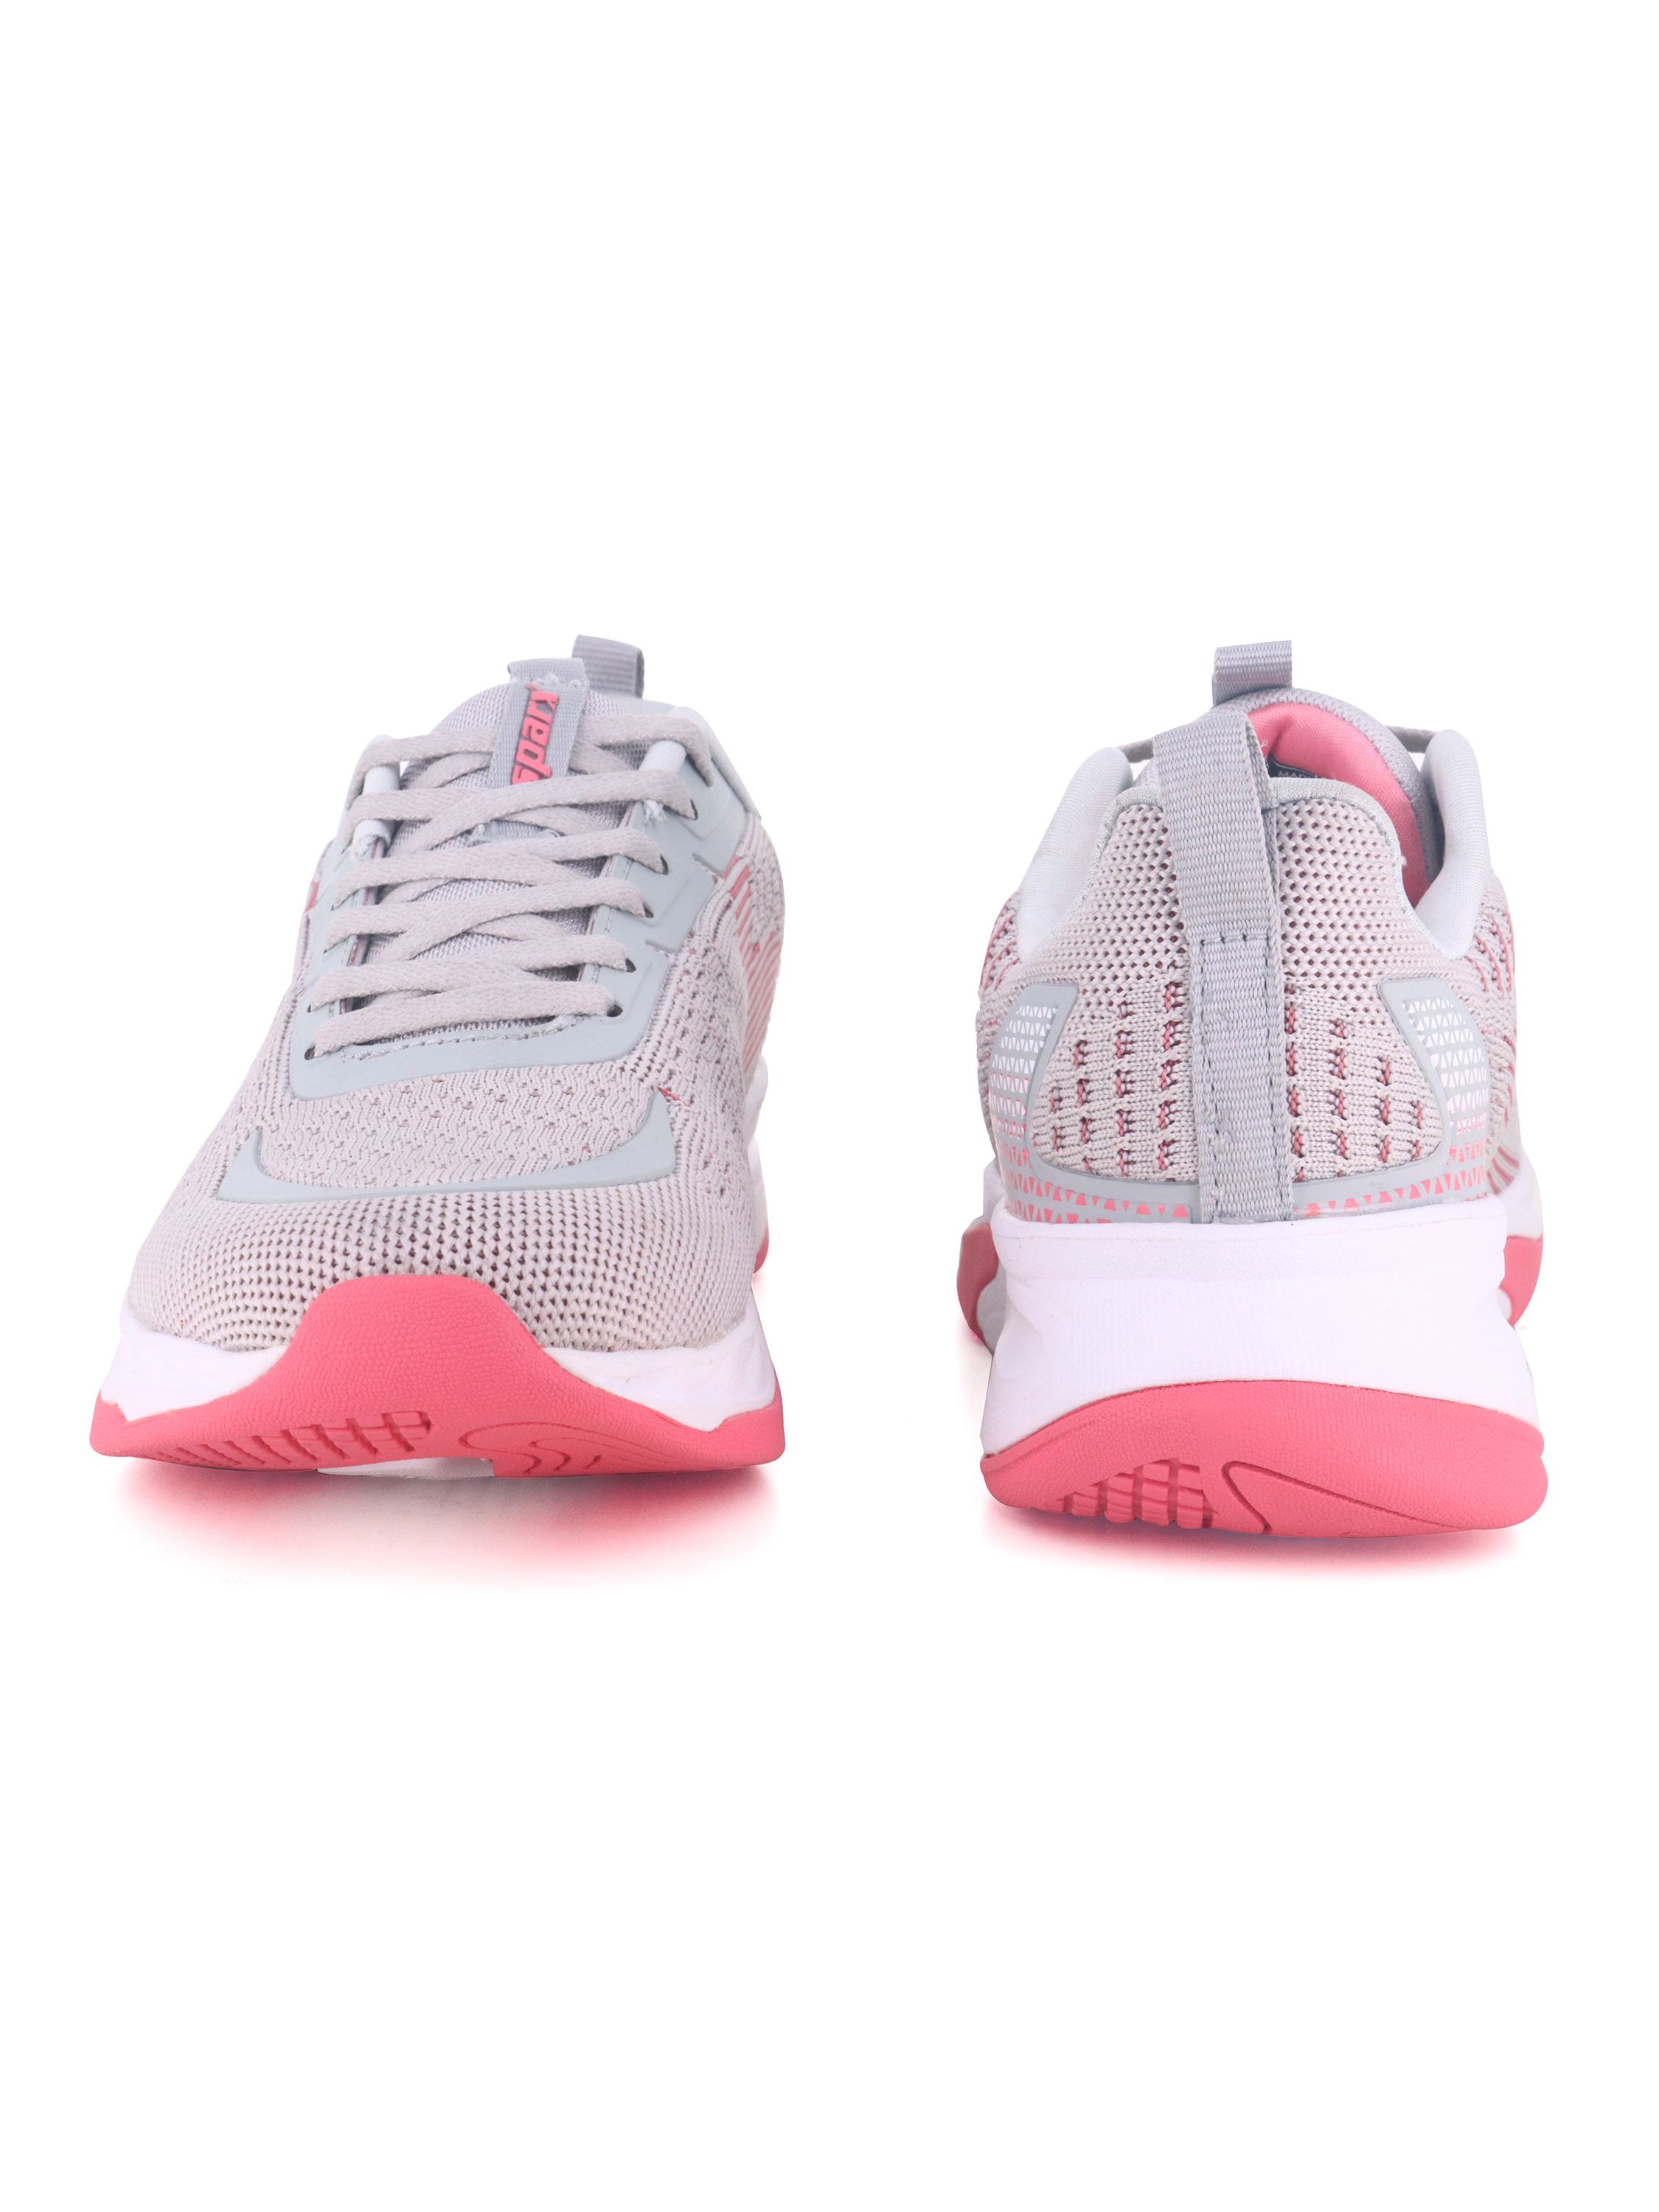     			Sparx - Lavender Women's Running Shoes